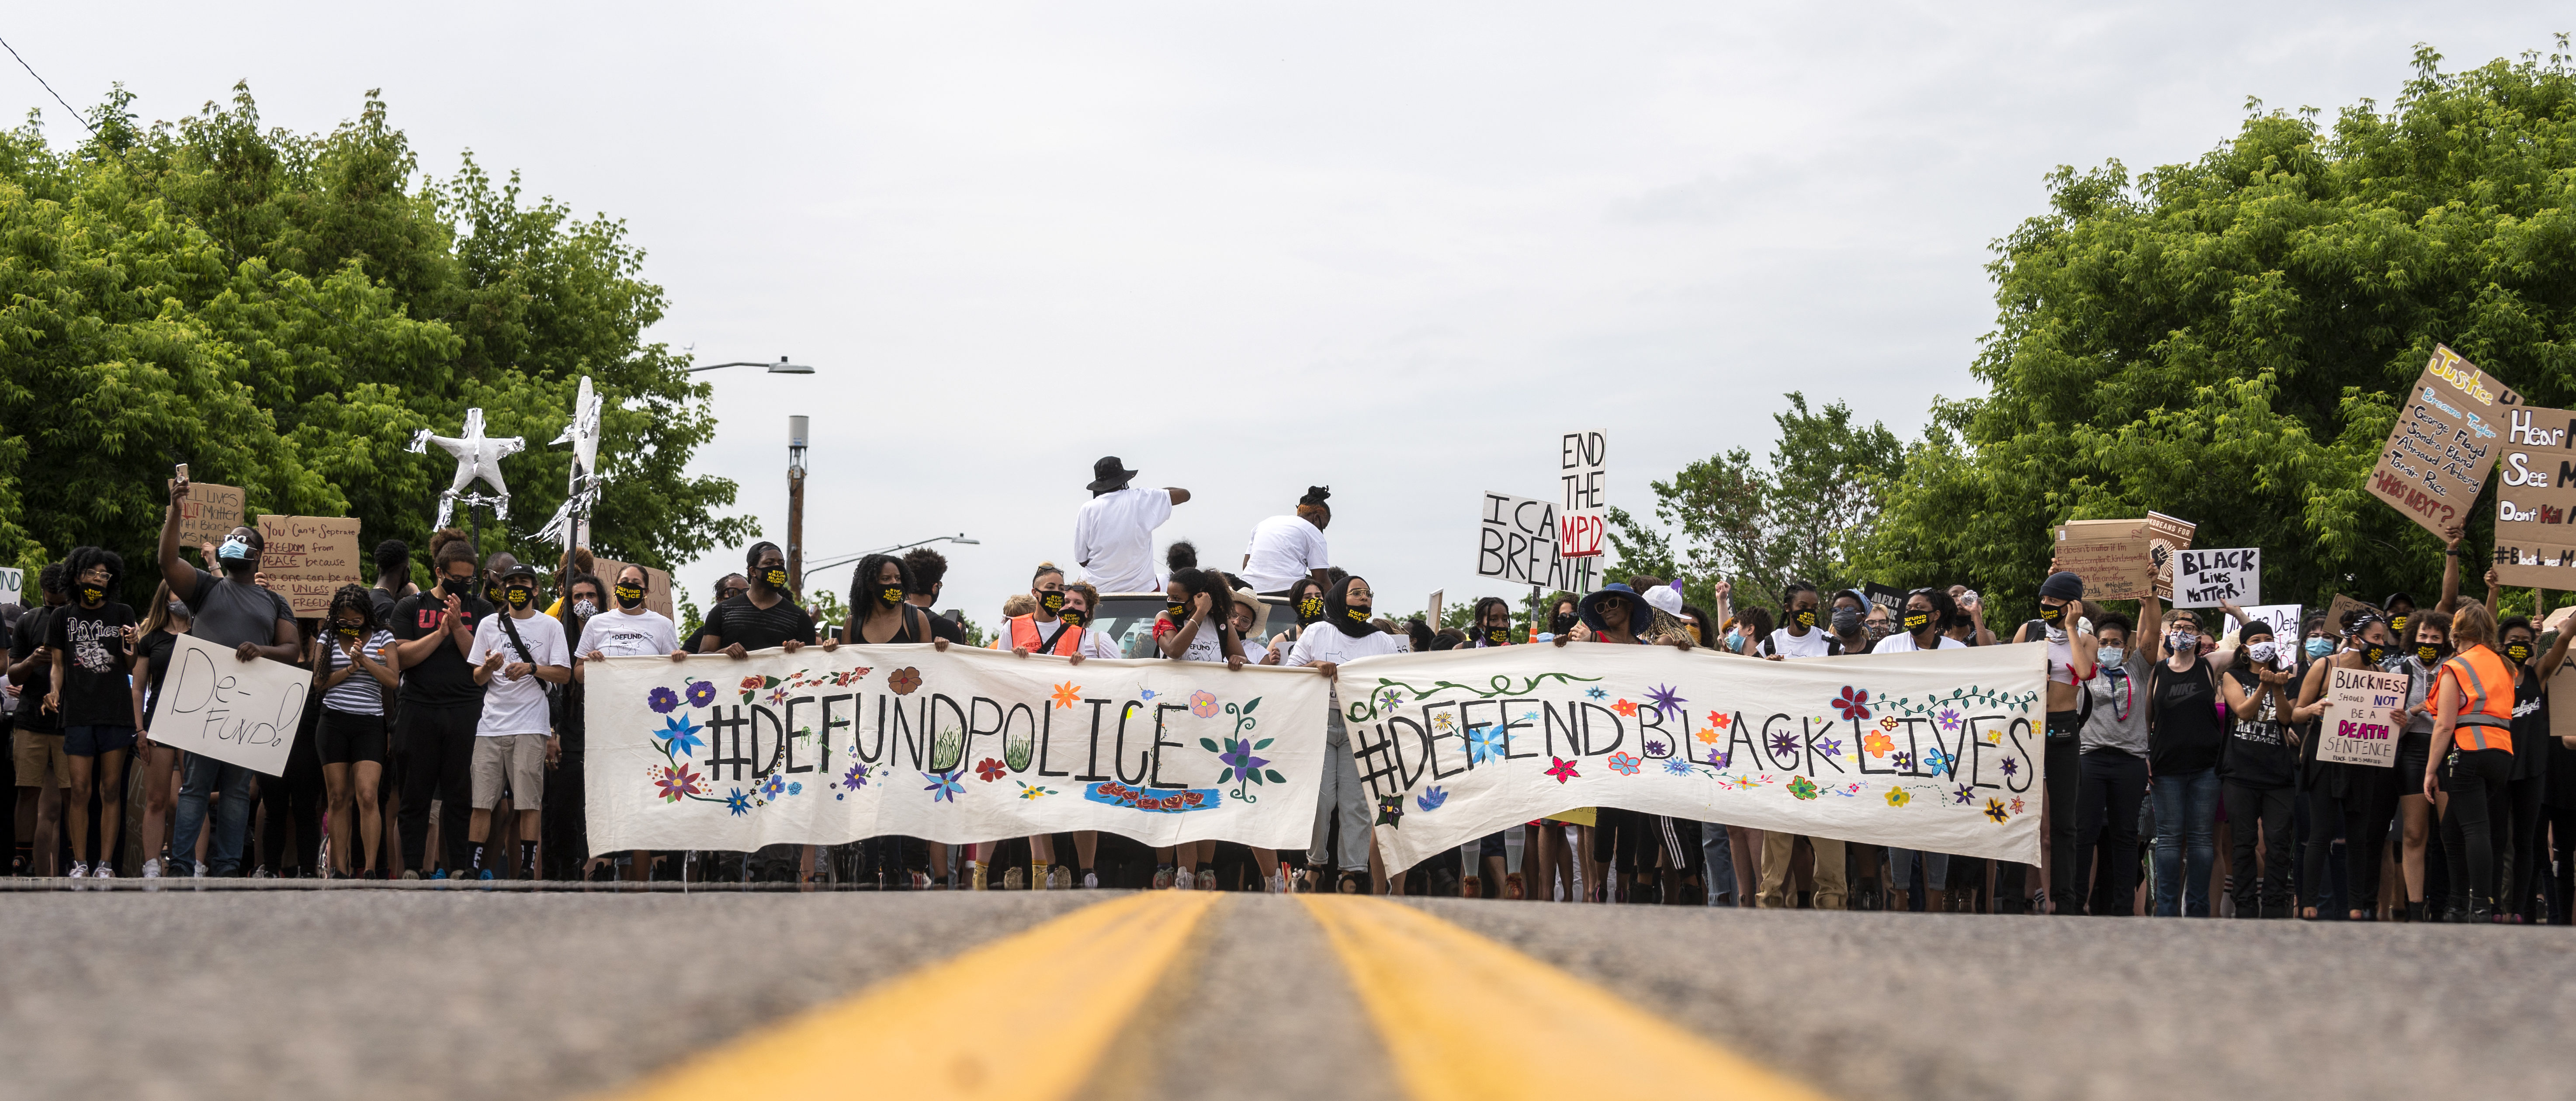 Demonstrators calling to defund the Minneapolis Police Department march on University Avenue on June 6, 2020 in Minneapolis, Minnesota. (Photo: Stephen Maturen/Getty Images)